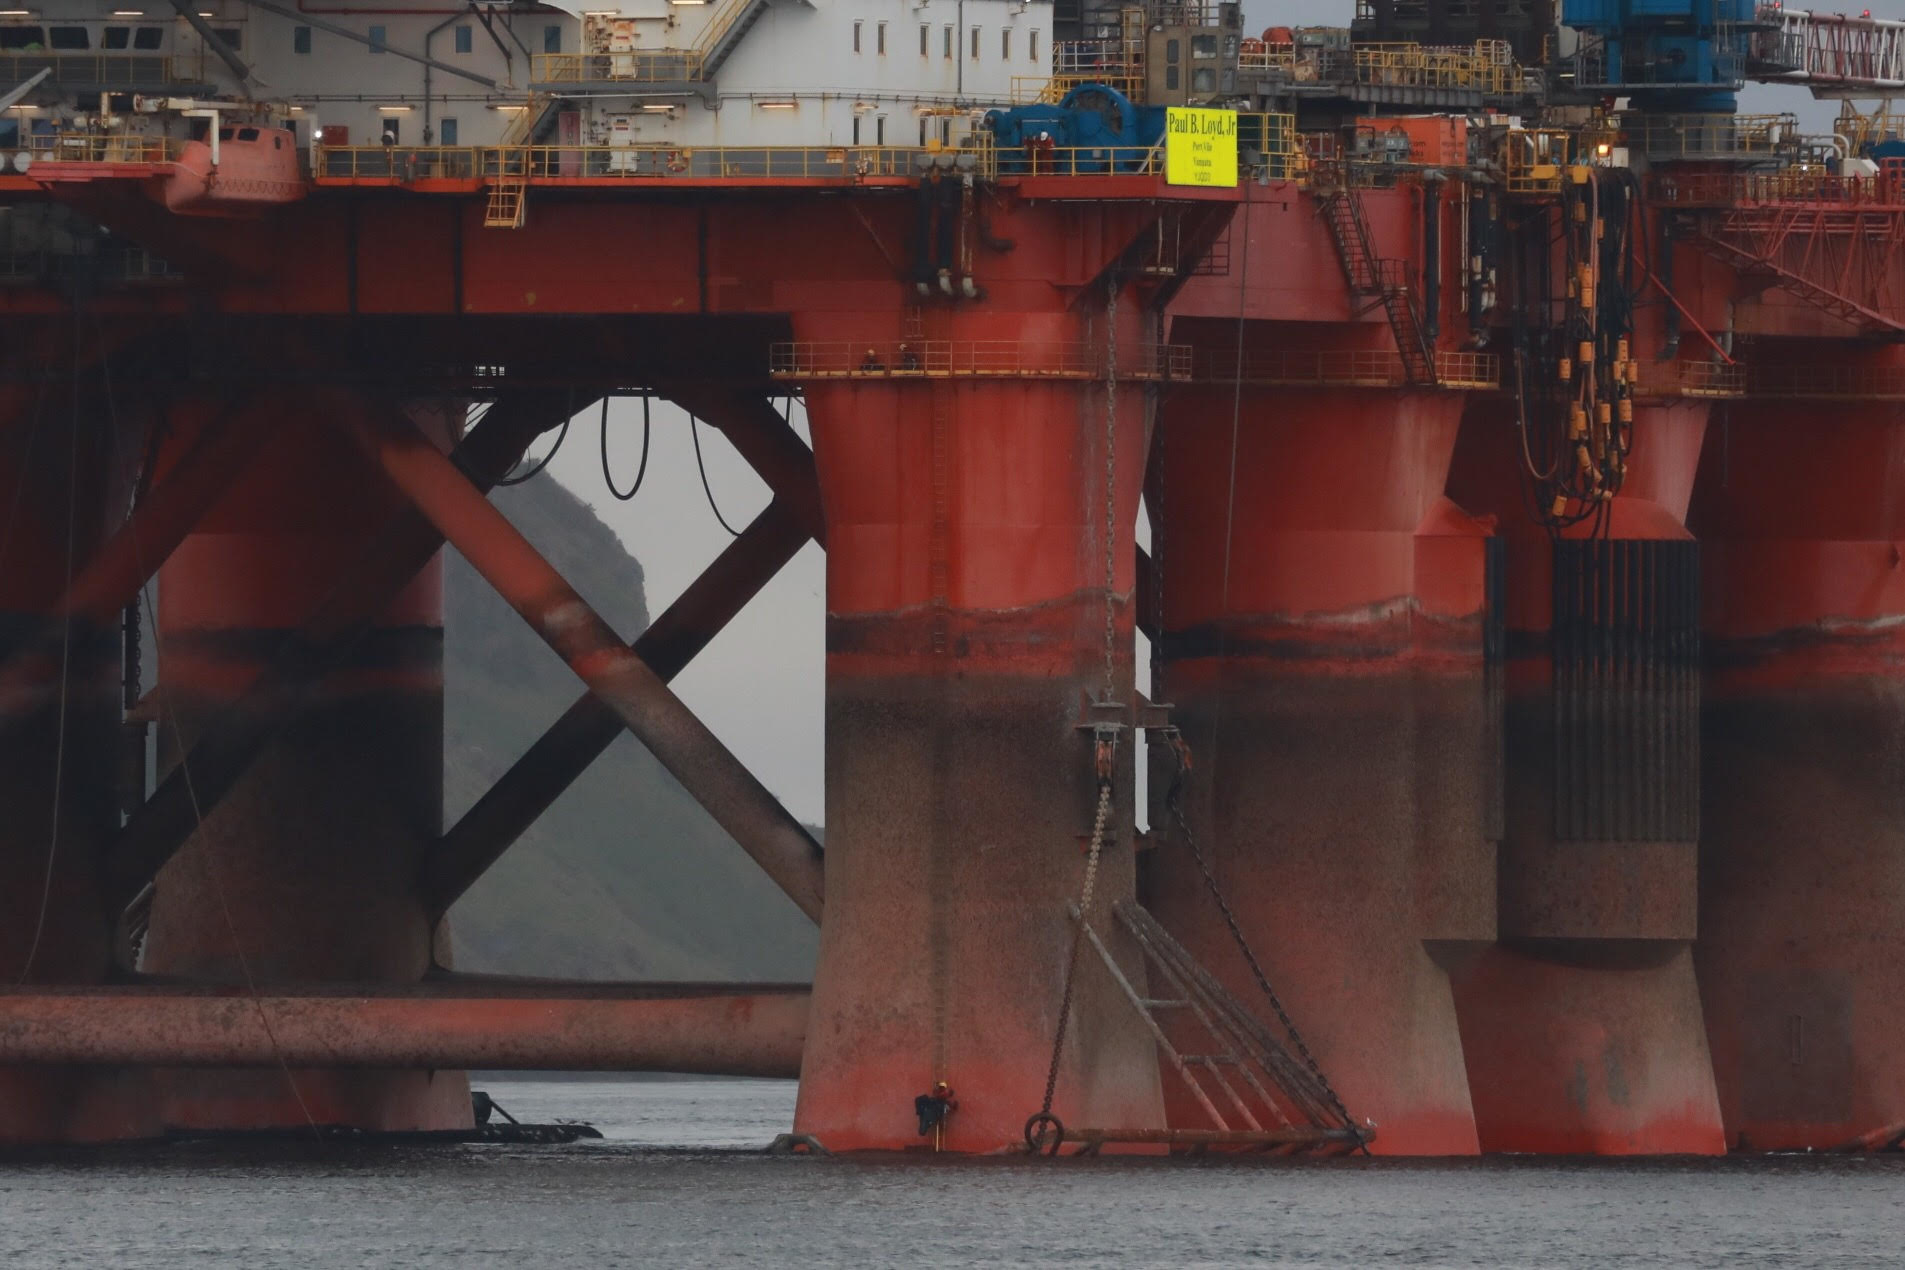 The oil rig in Cromarty Firth, Scotland, where Greenpeace protesters have climbed aboard (Greenpeace/PA)